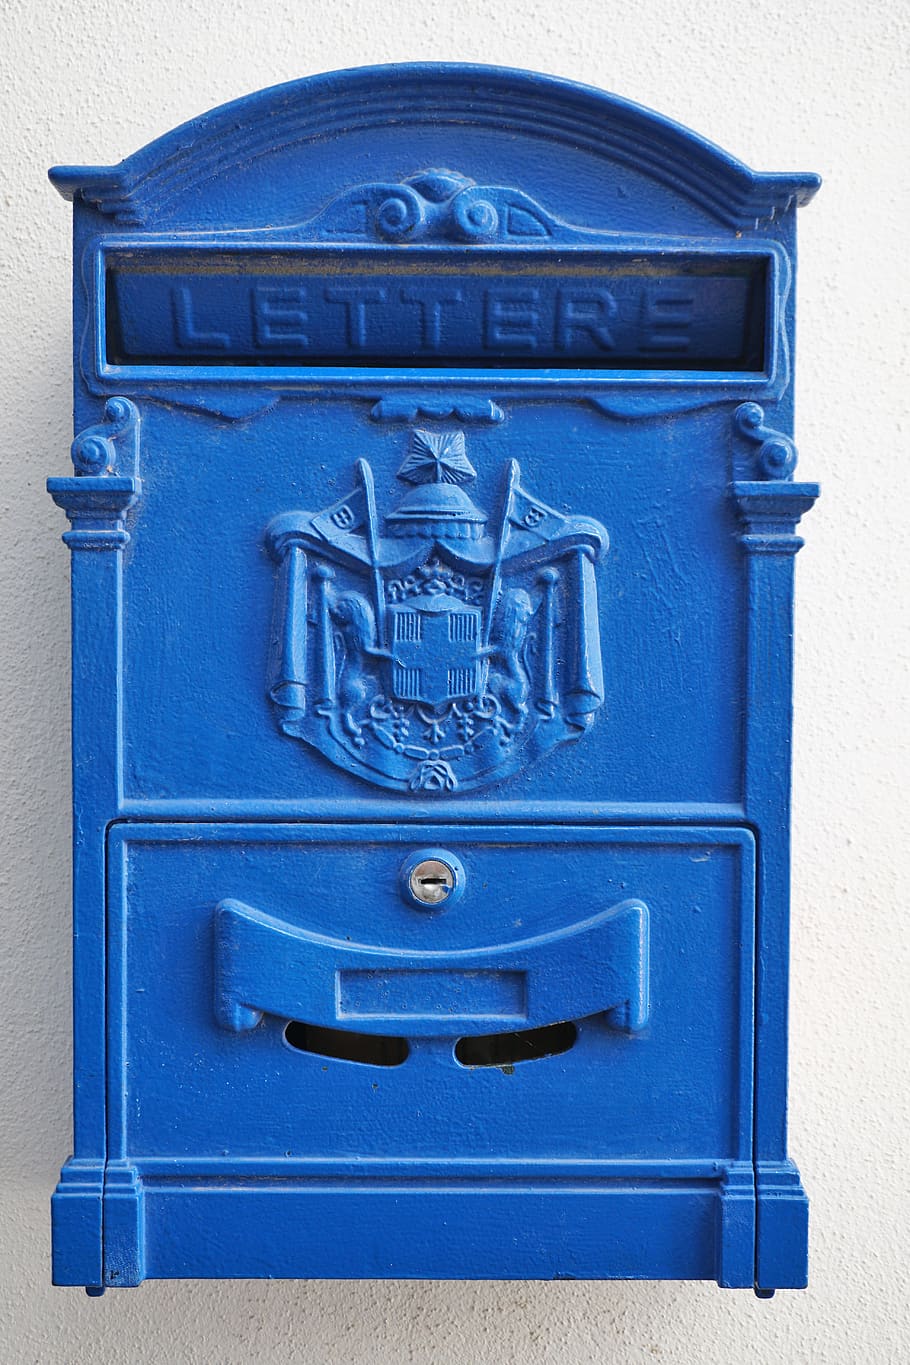 mailbox, letter boxes, post, metal, letter box, mail box, post einwurf, blue, wall, letter